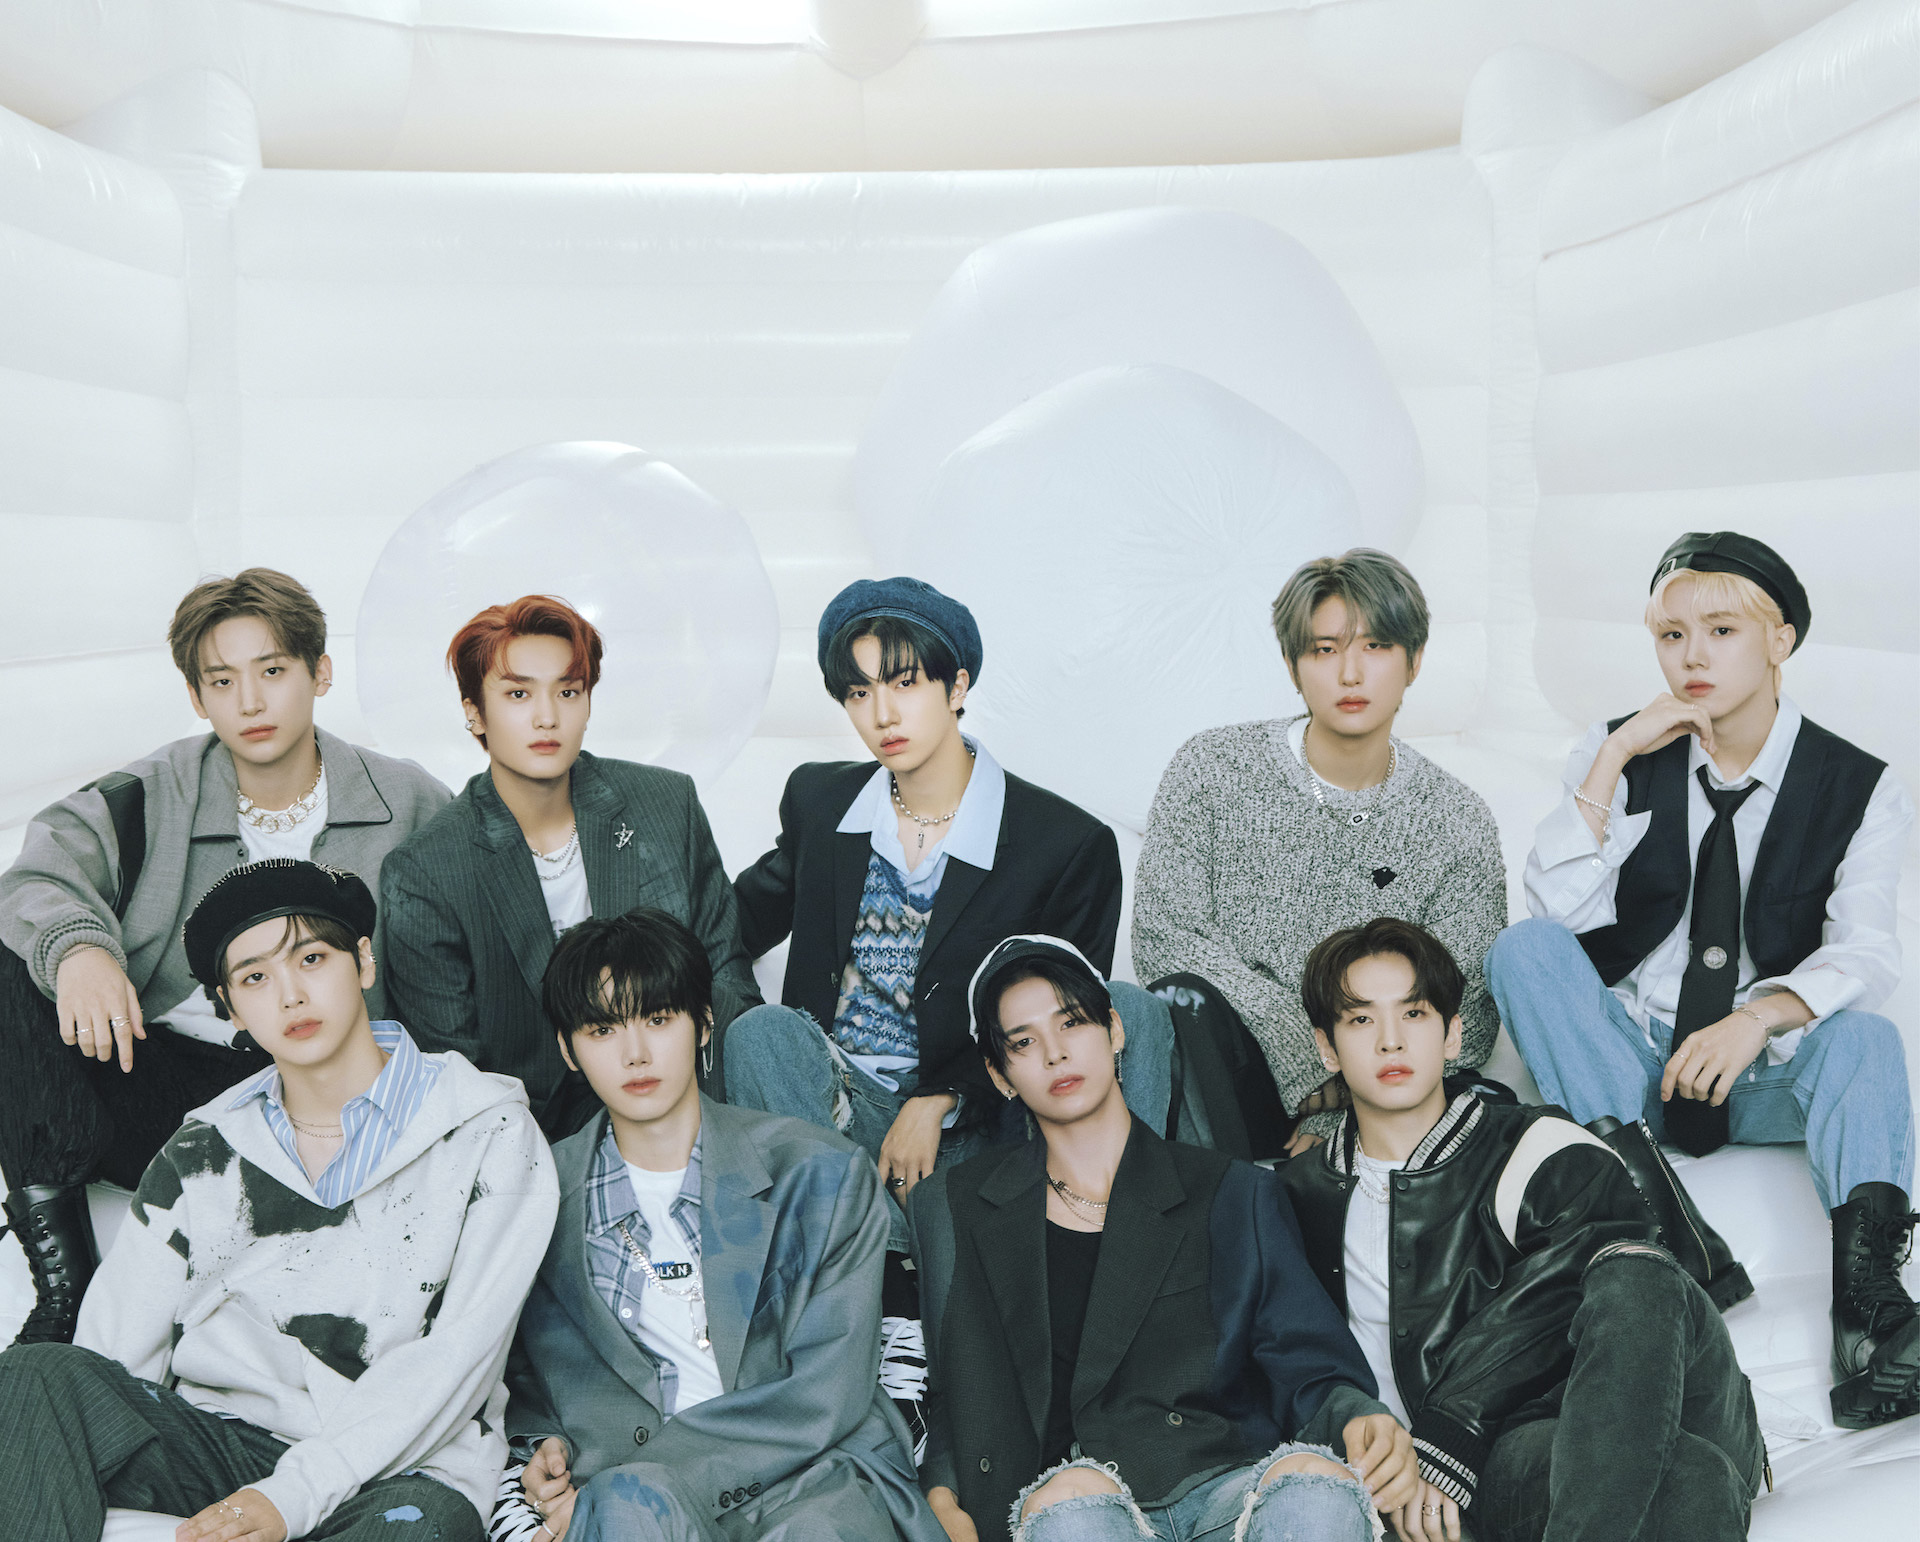 Starship Entertainment’s nine-member boy group, CRAVITY, entered the K-pop scene amid the pandemic, unknowing of the many successes and accomplishments that would occur in the years to come. 